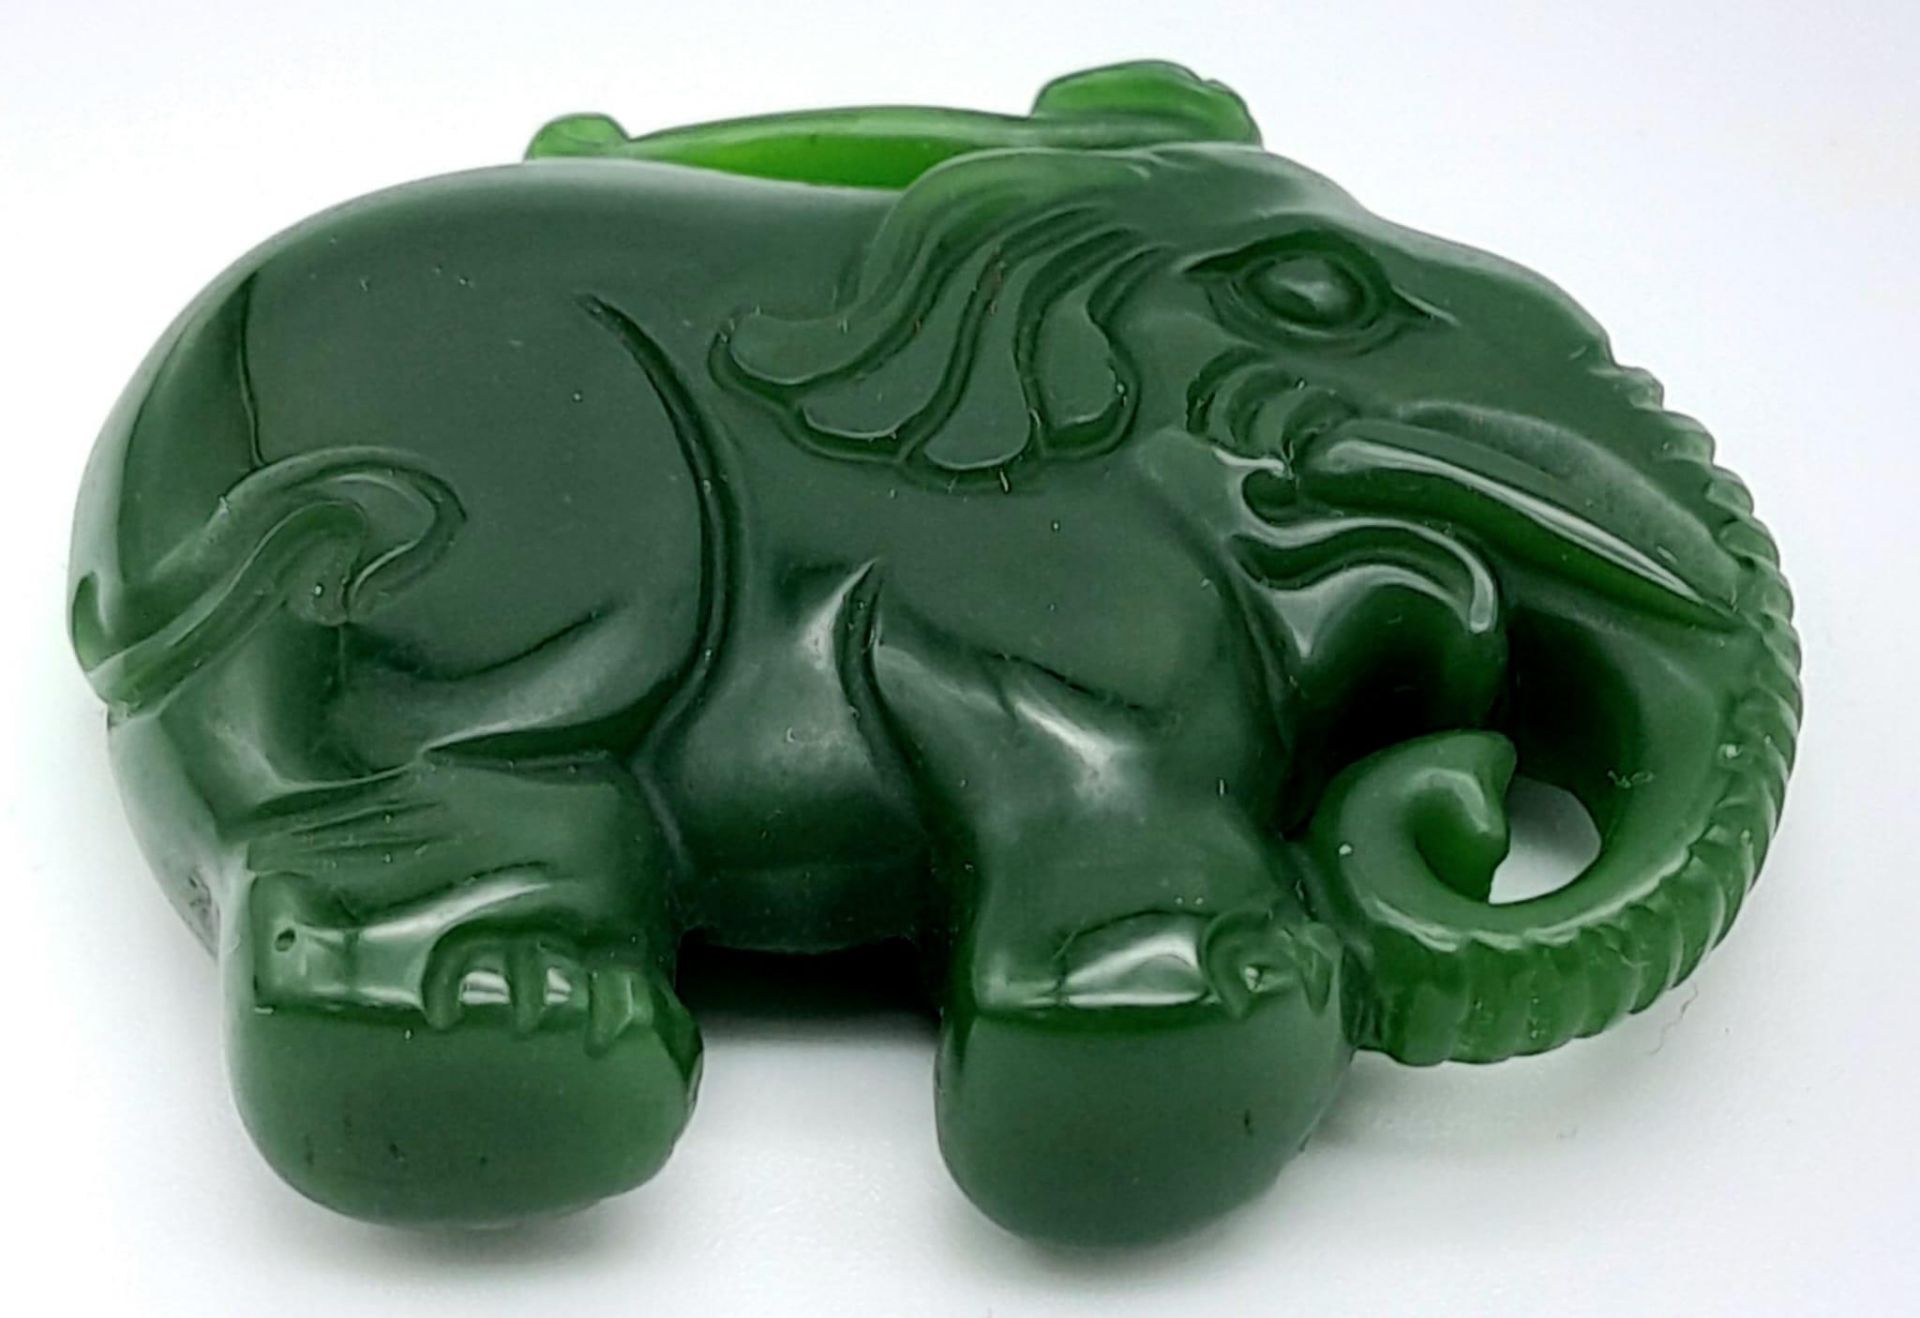 A Green Jade Chinese Hand-Carved Elephant Pendant. 5cm x 4cm. - Image 3 of 4